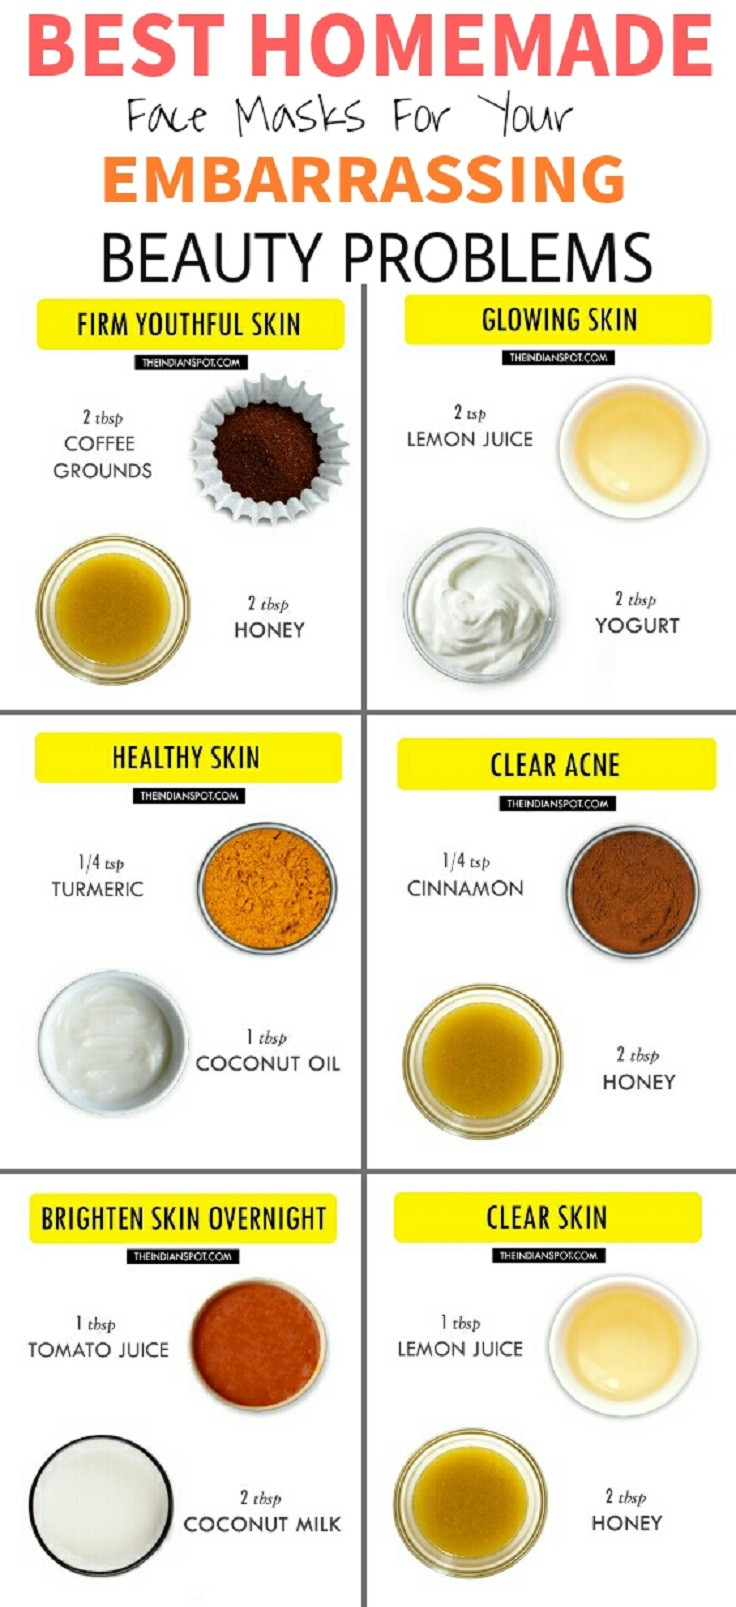 DIY Facial Mask Recipes
 14 Beneficial Beauty Tips for Face and Body Care to